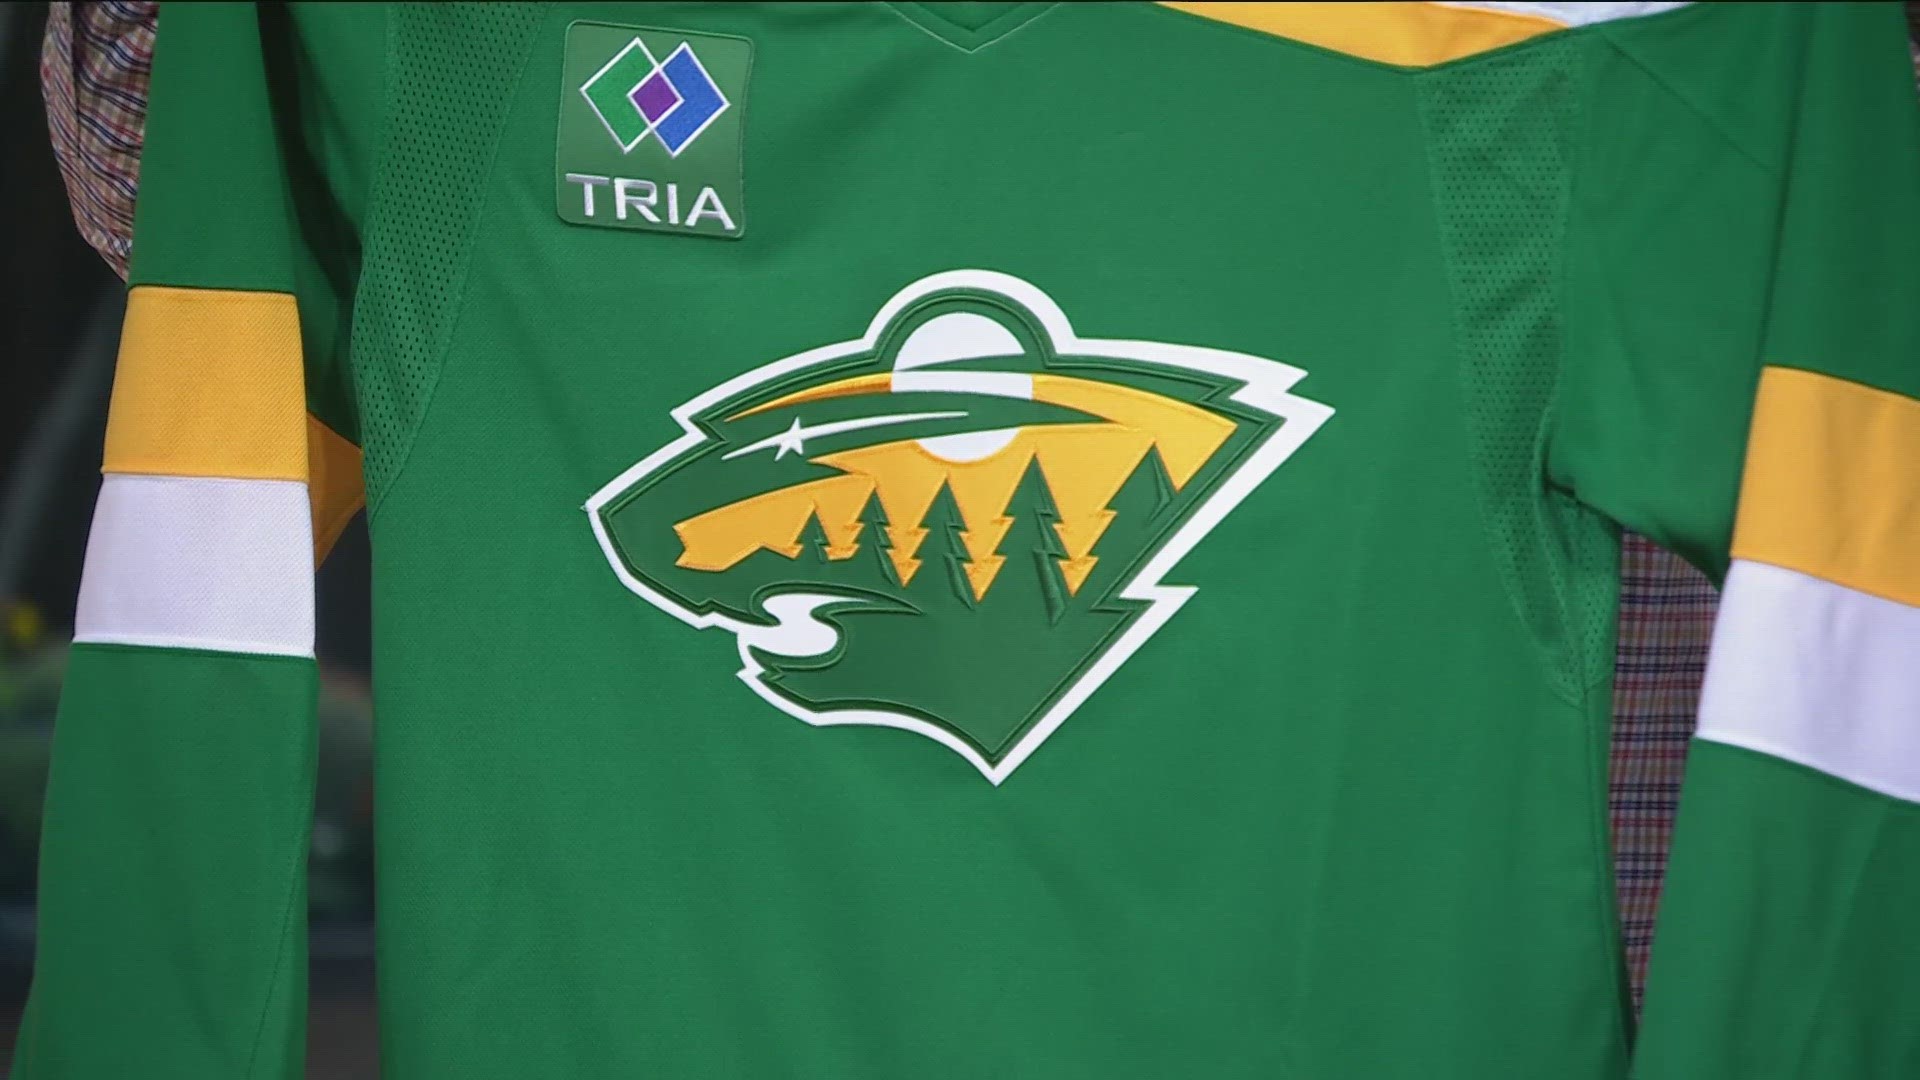 These new sweaters pay homage to the North Stars' lineup in 1978.